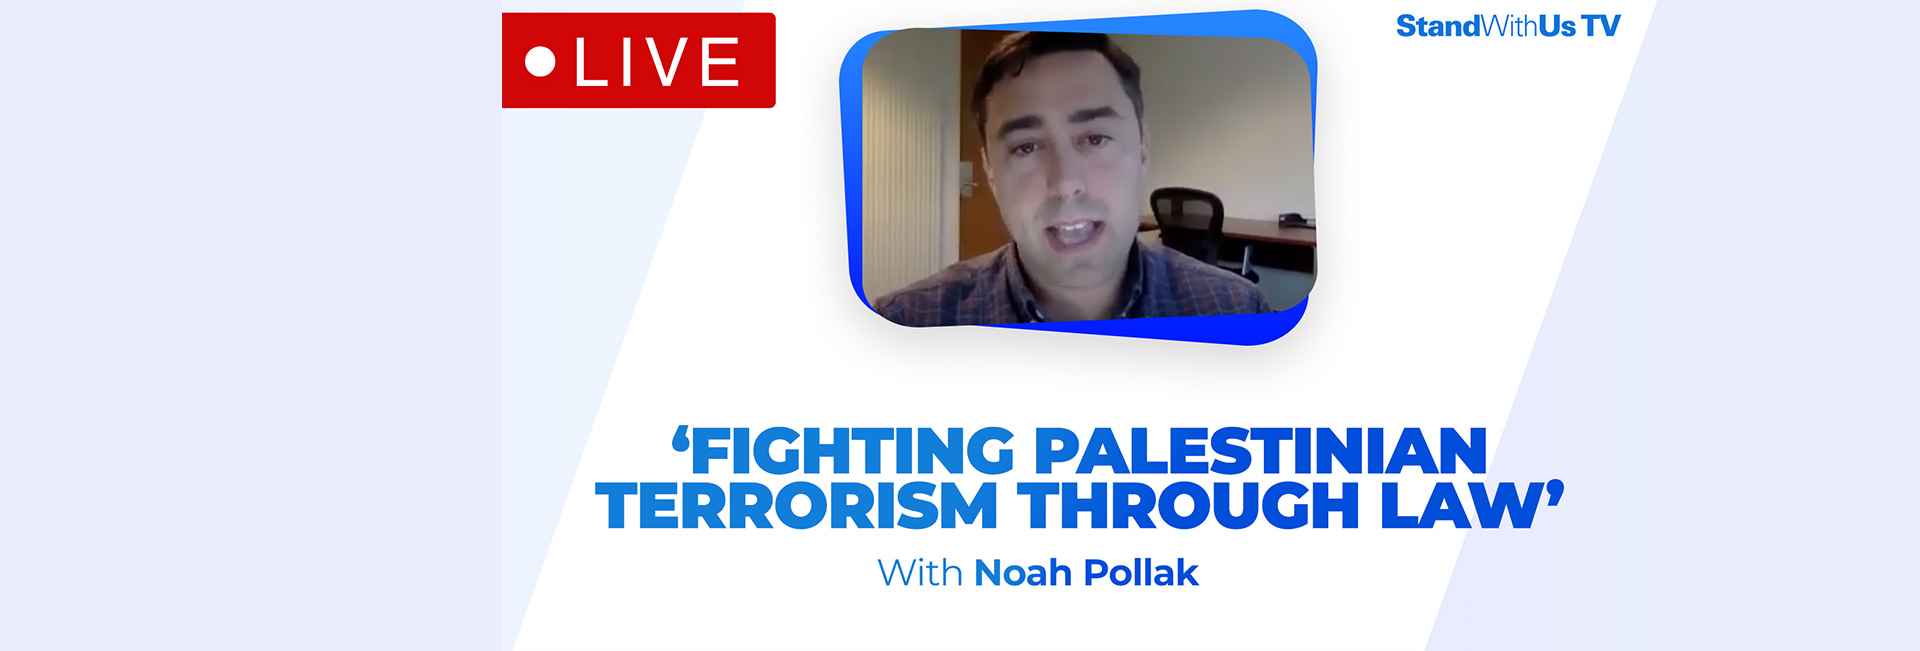 Fighting Palestinian Terrorism Through Law | SWUConnect #6